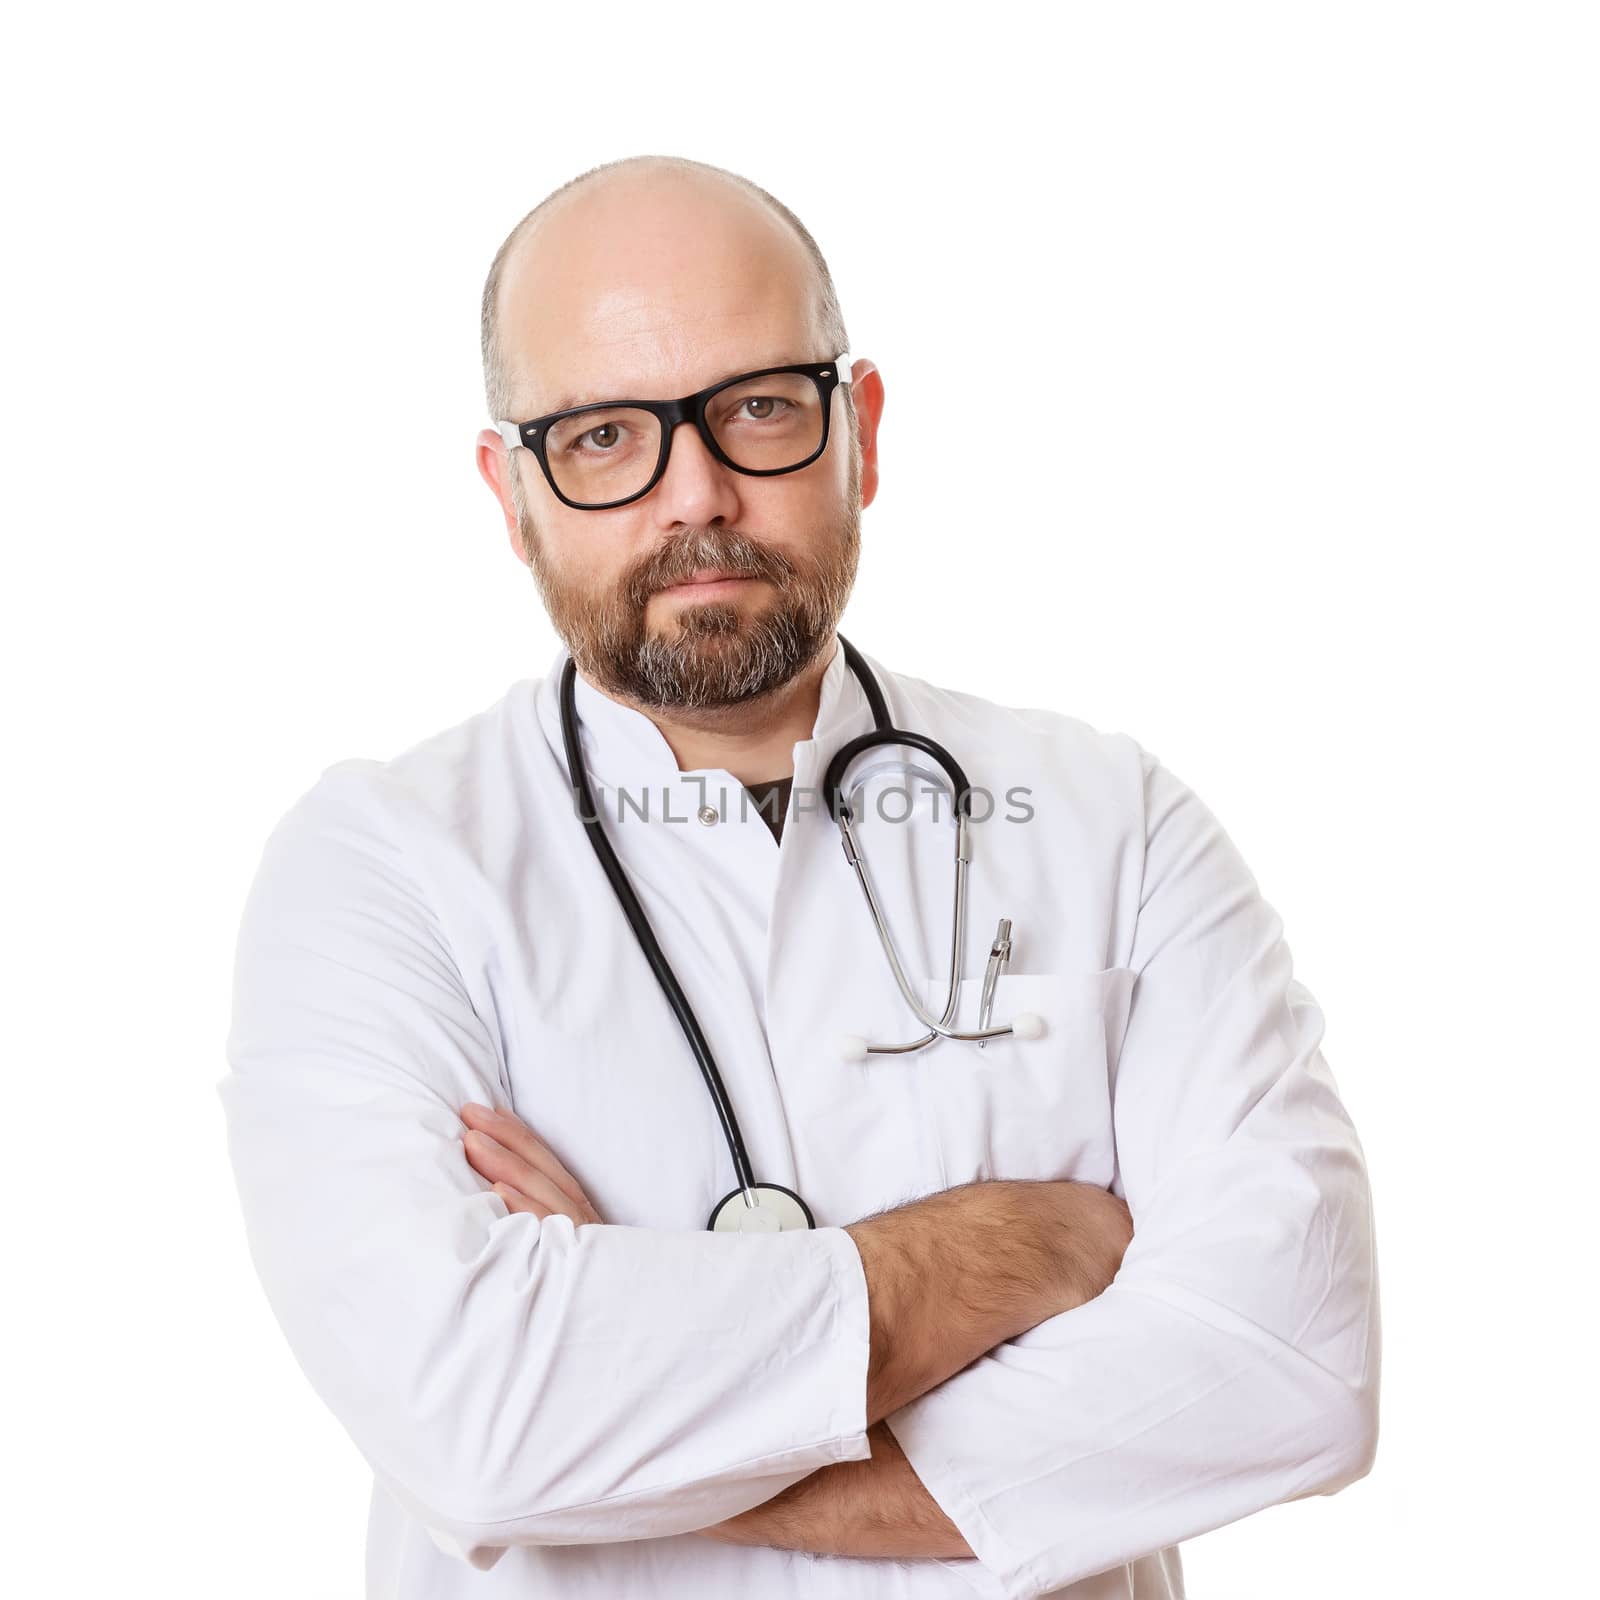 An image of a doctor with a stethoscope isolated on white